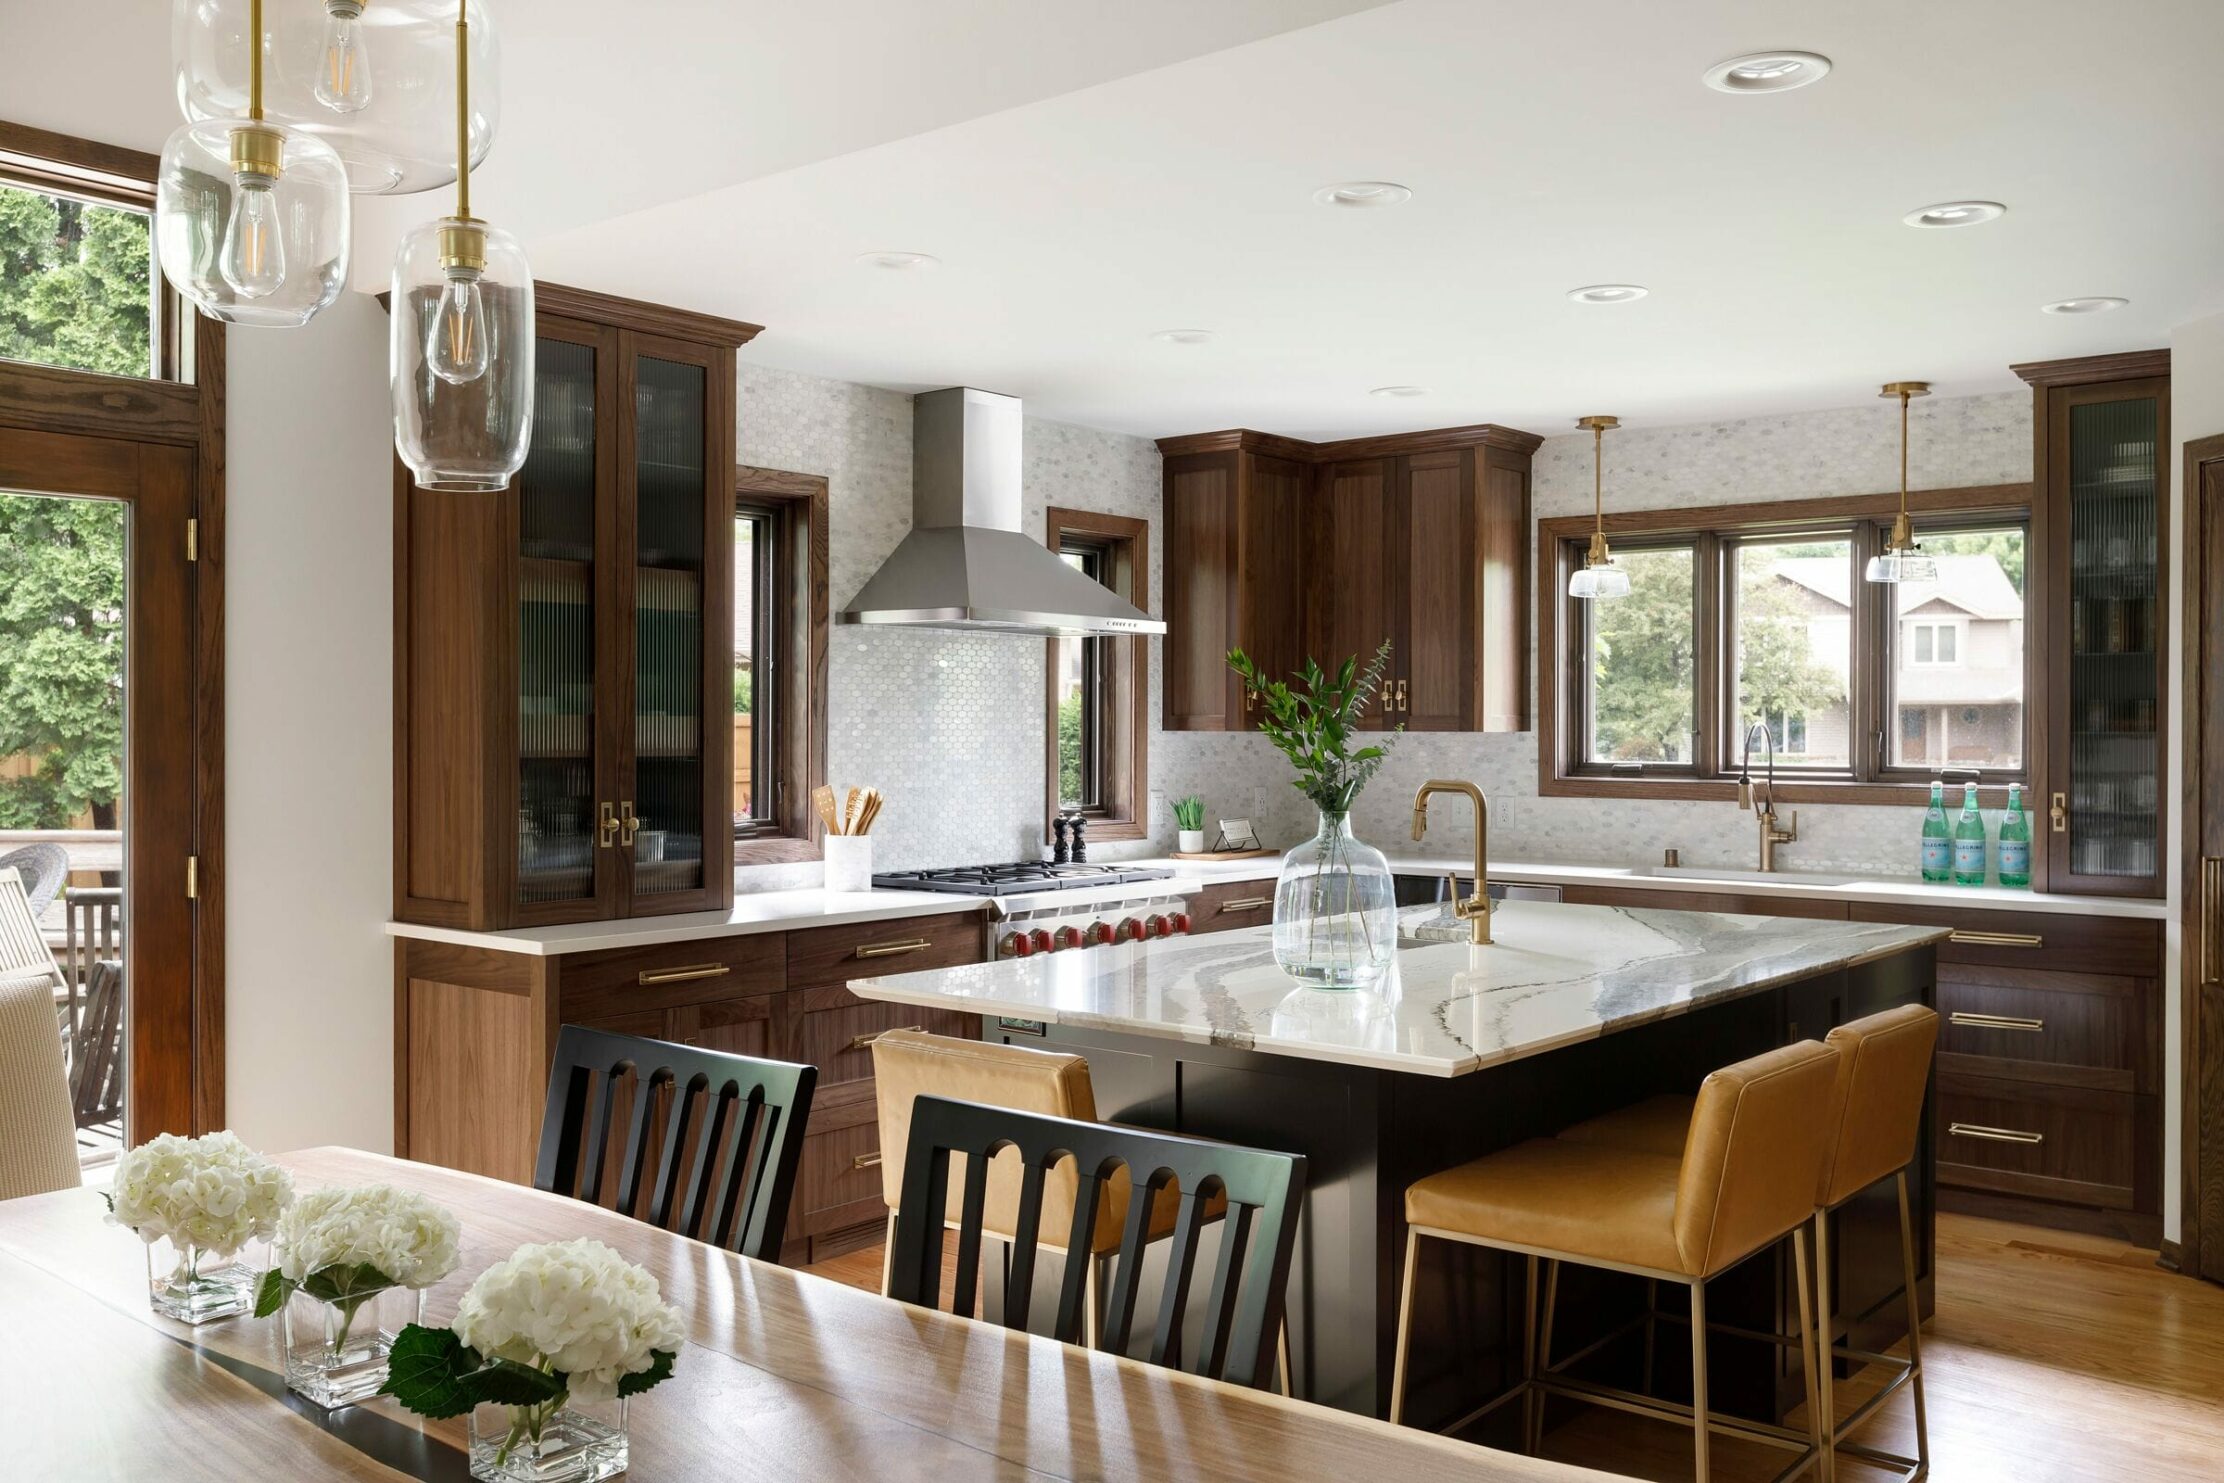 Minnesota kitchen remodel part of Parade of Homes MN Remodelers Showcase with brown cabinetry and gold and glass light fixtures.